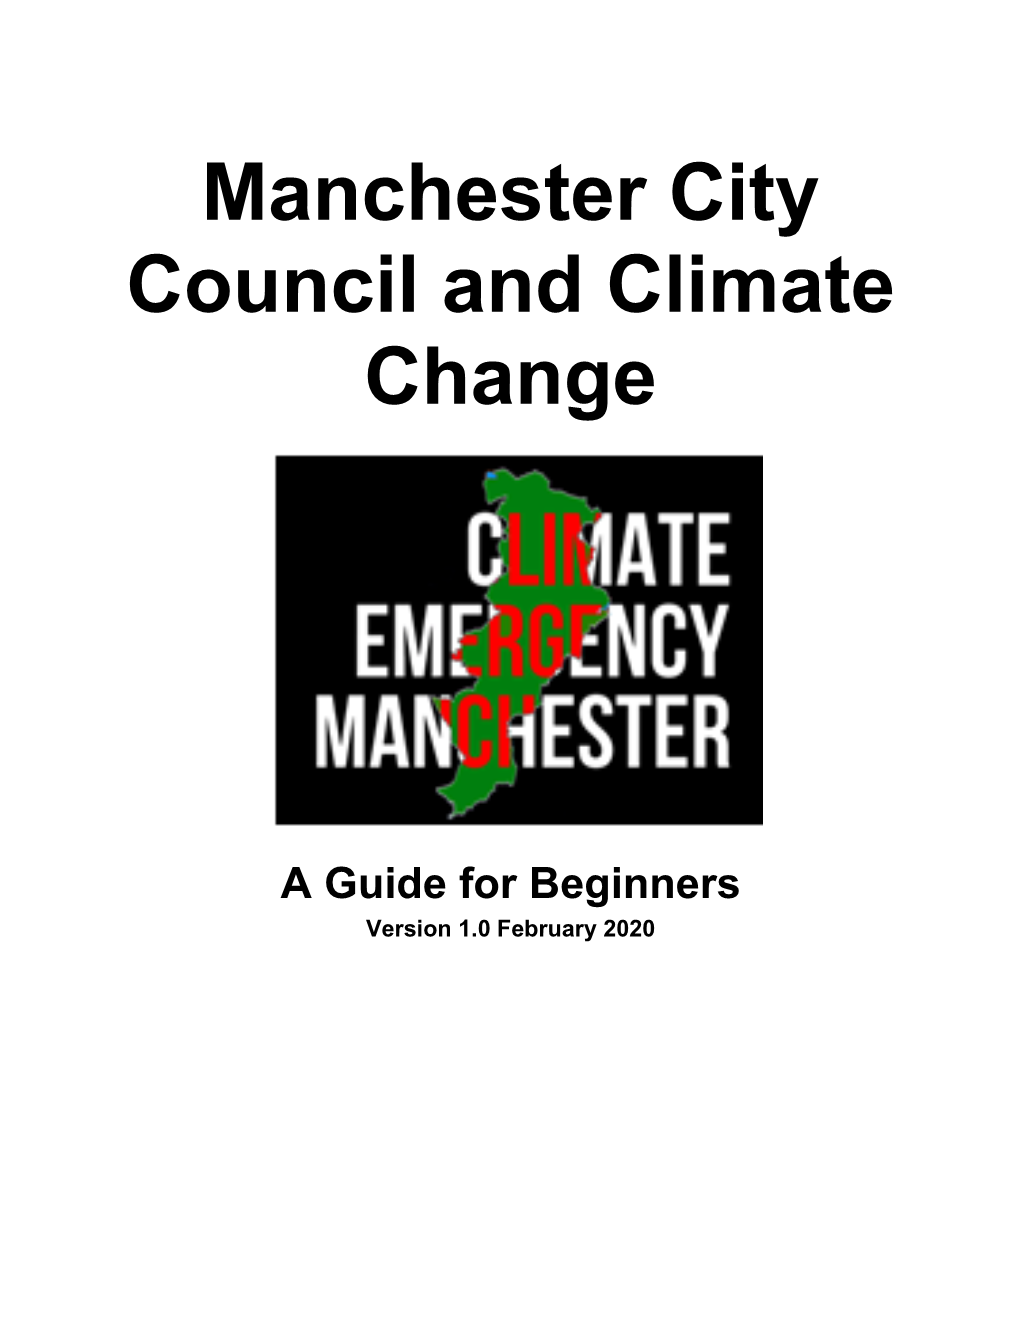 Manchester City Council and Climate Change